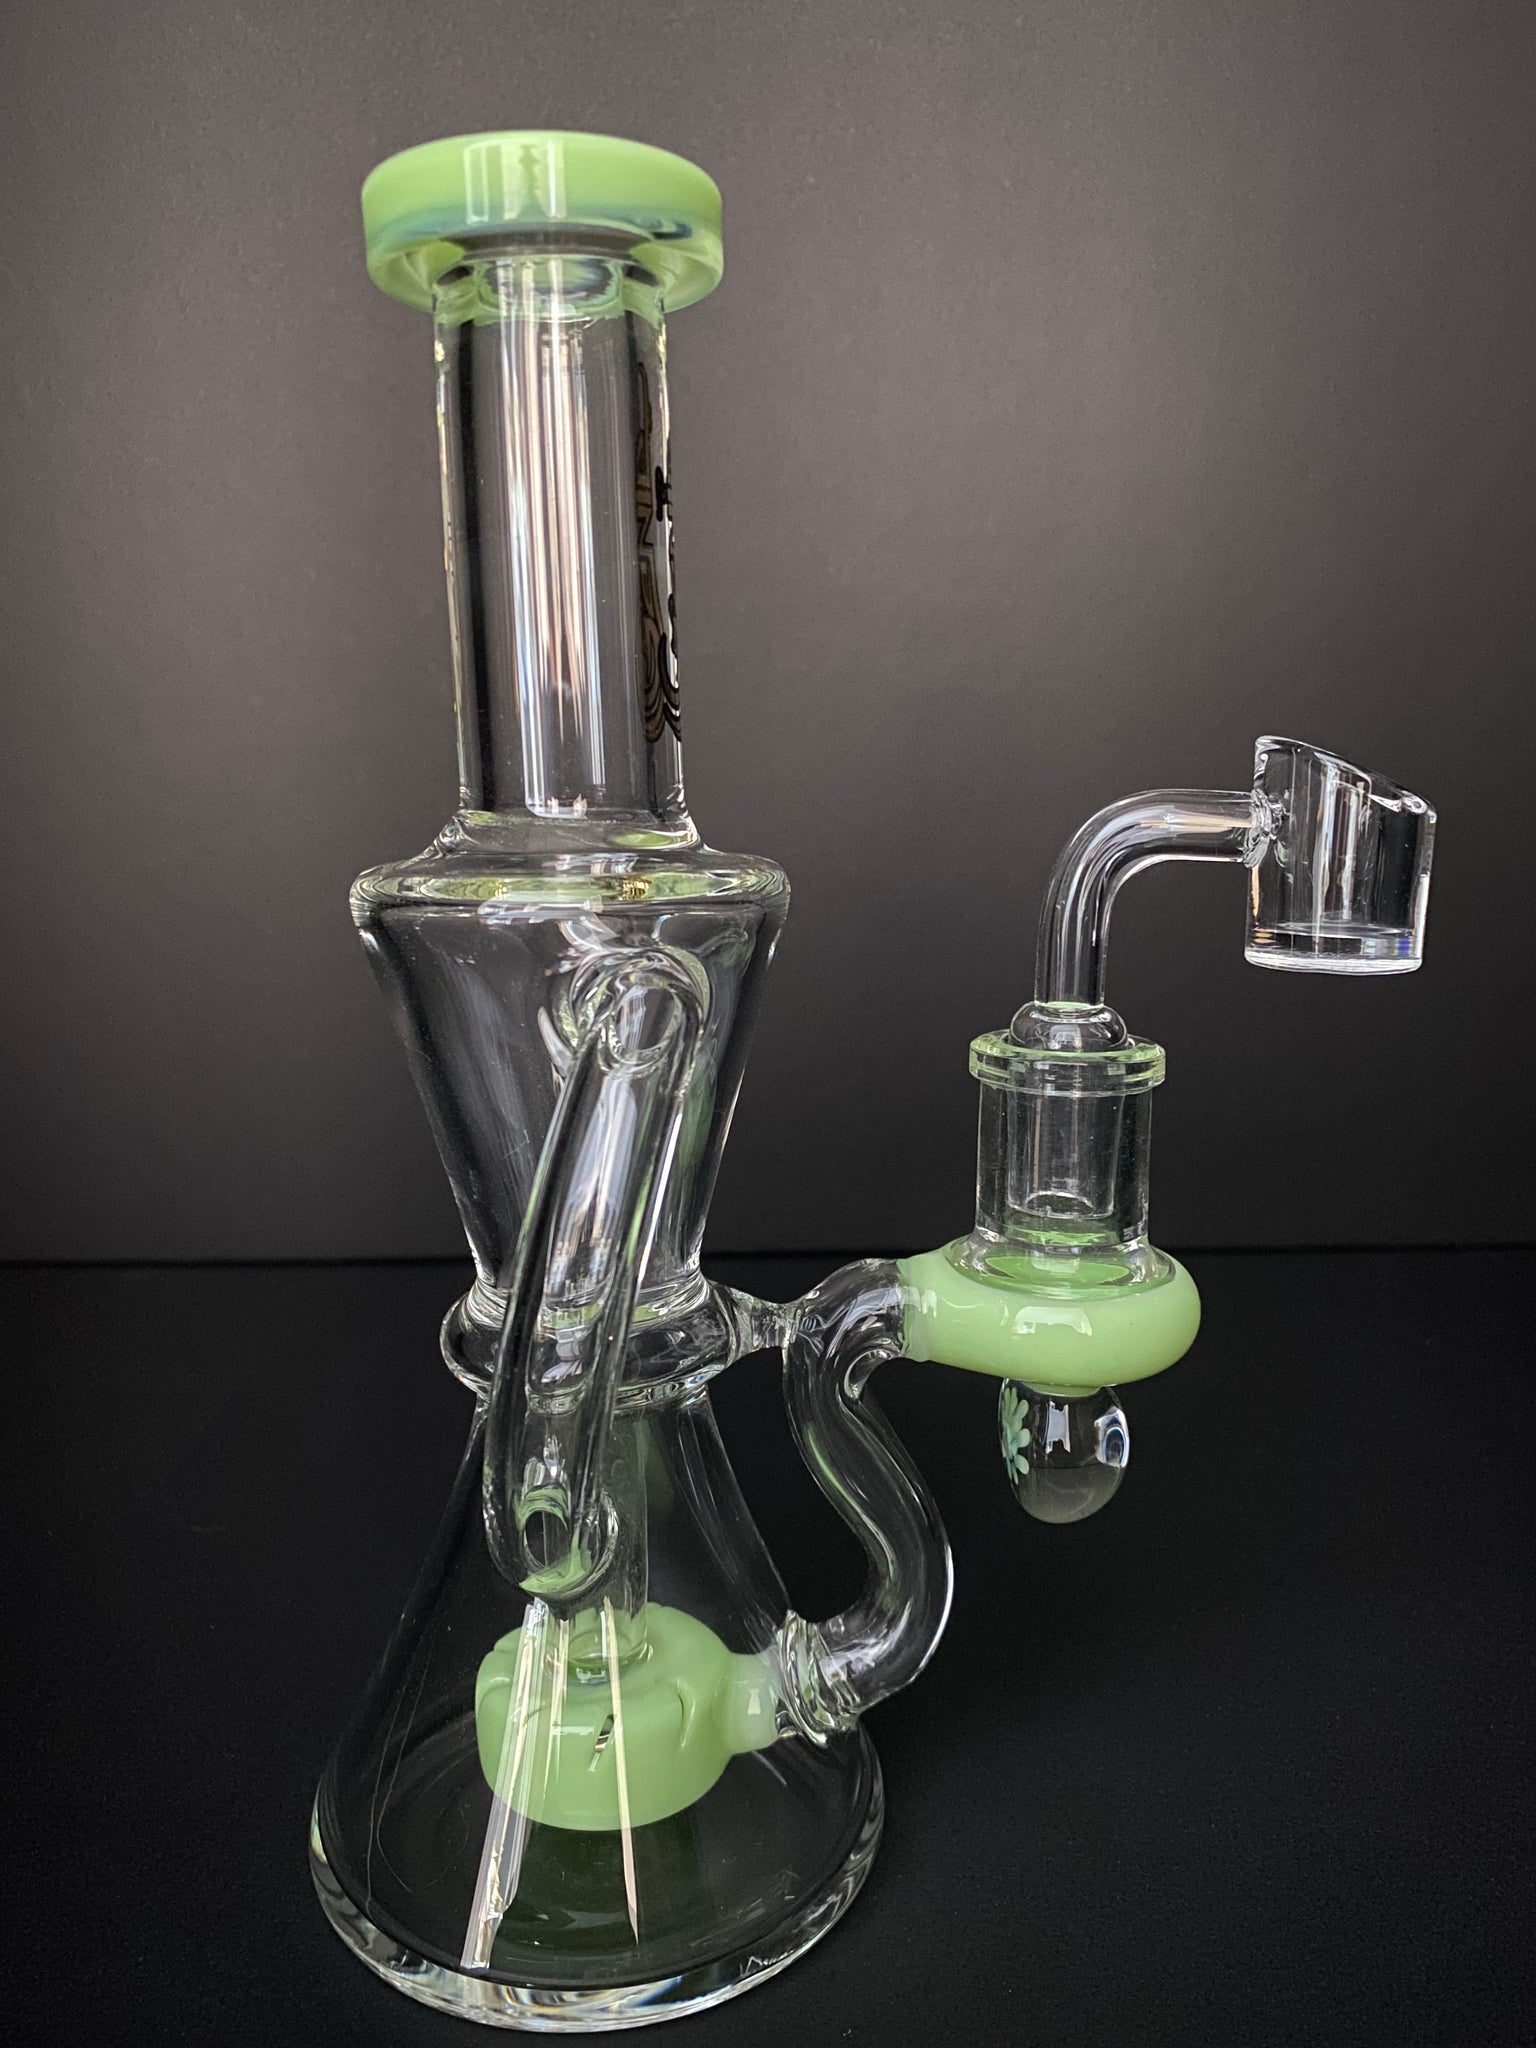 8" GENIE Recycled Rig with a Banger